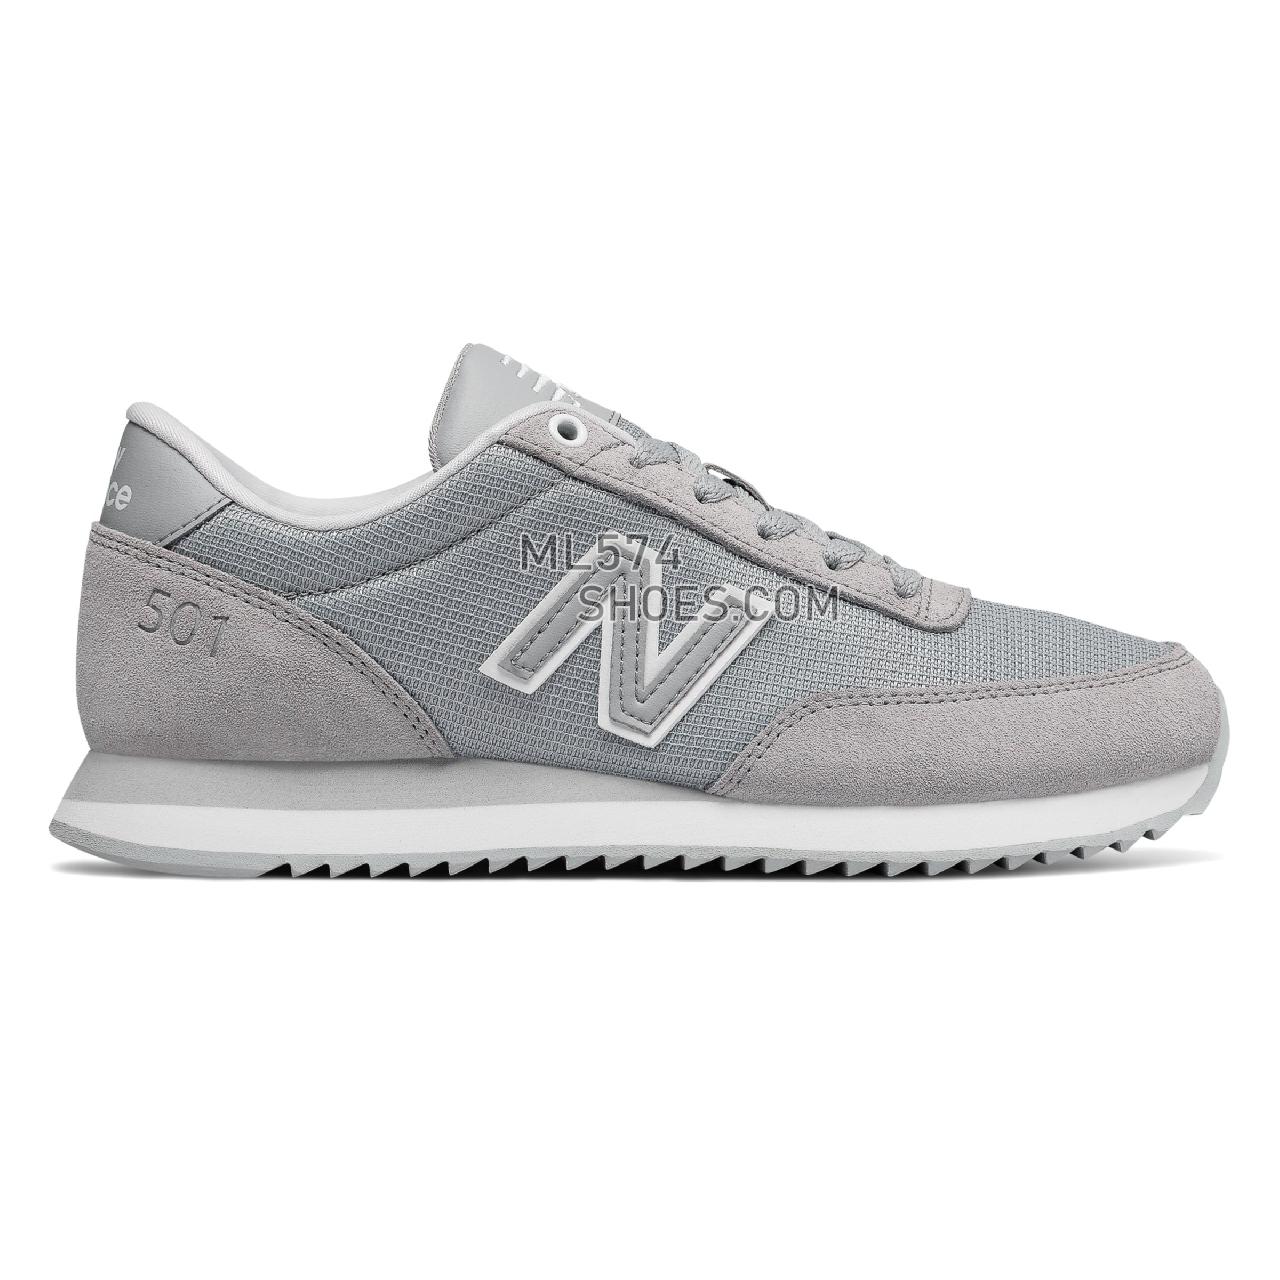 New Balance 501 Heritage - Women's 501 - Classic Silver Mink with White - WZ501PCE